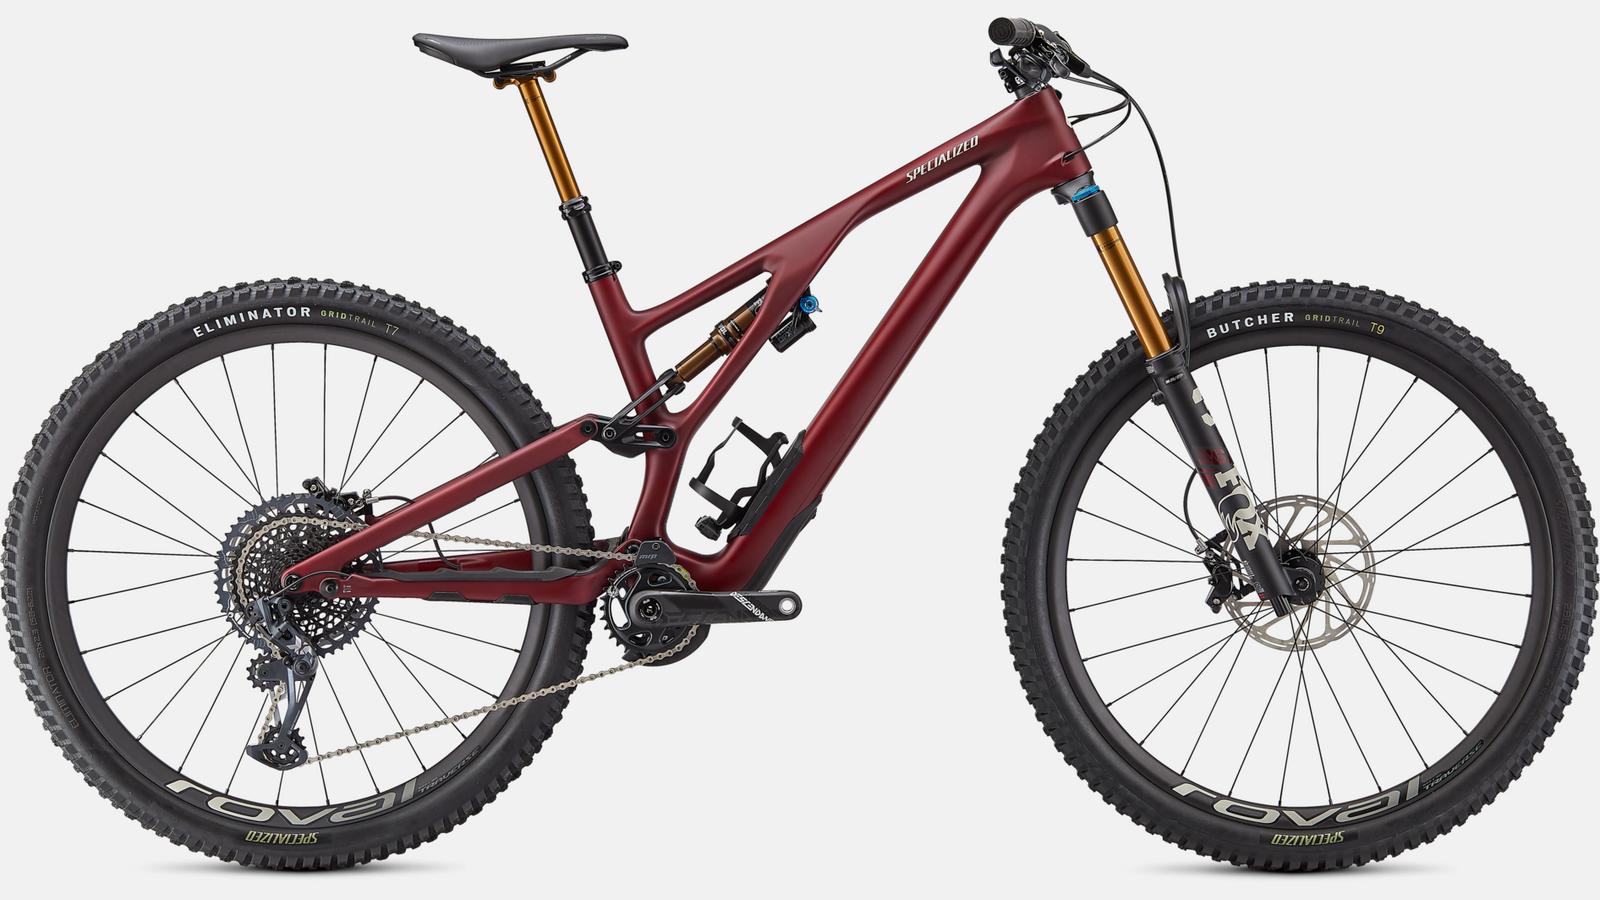 Paint for 2021 Specialized Stumpjumper EVO Pro - Satin Maroon